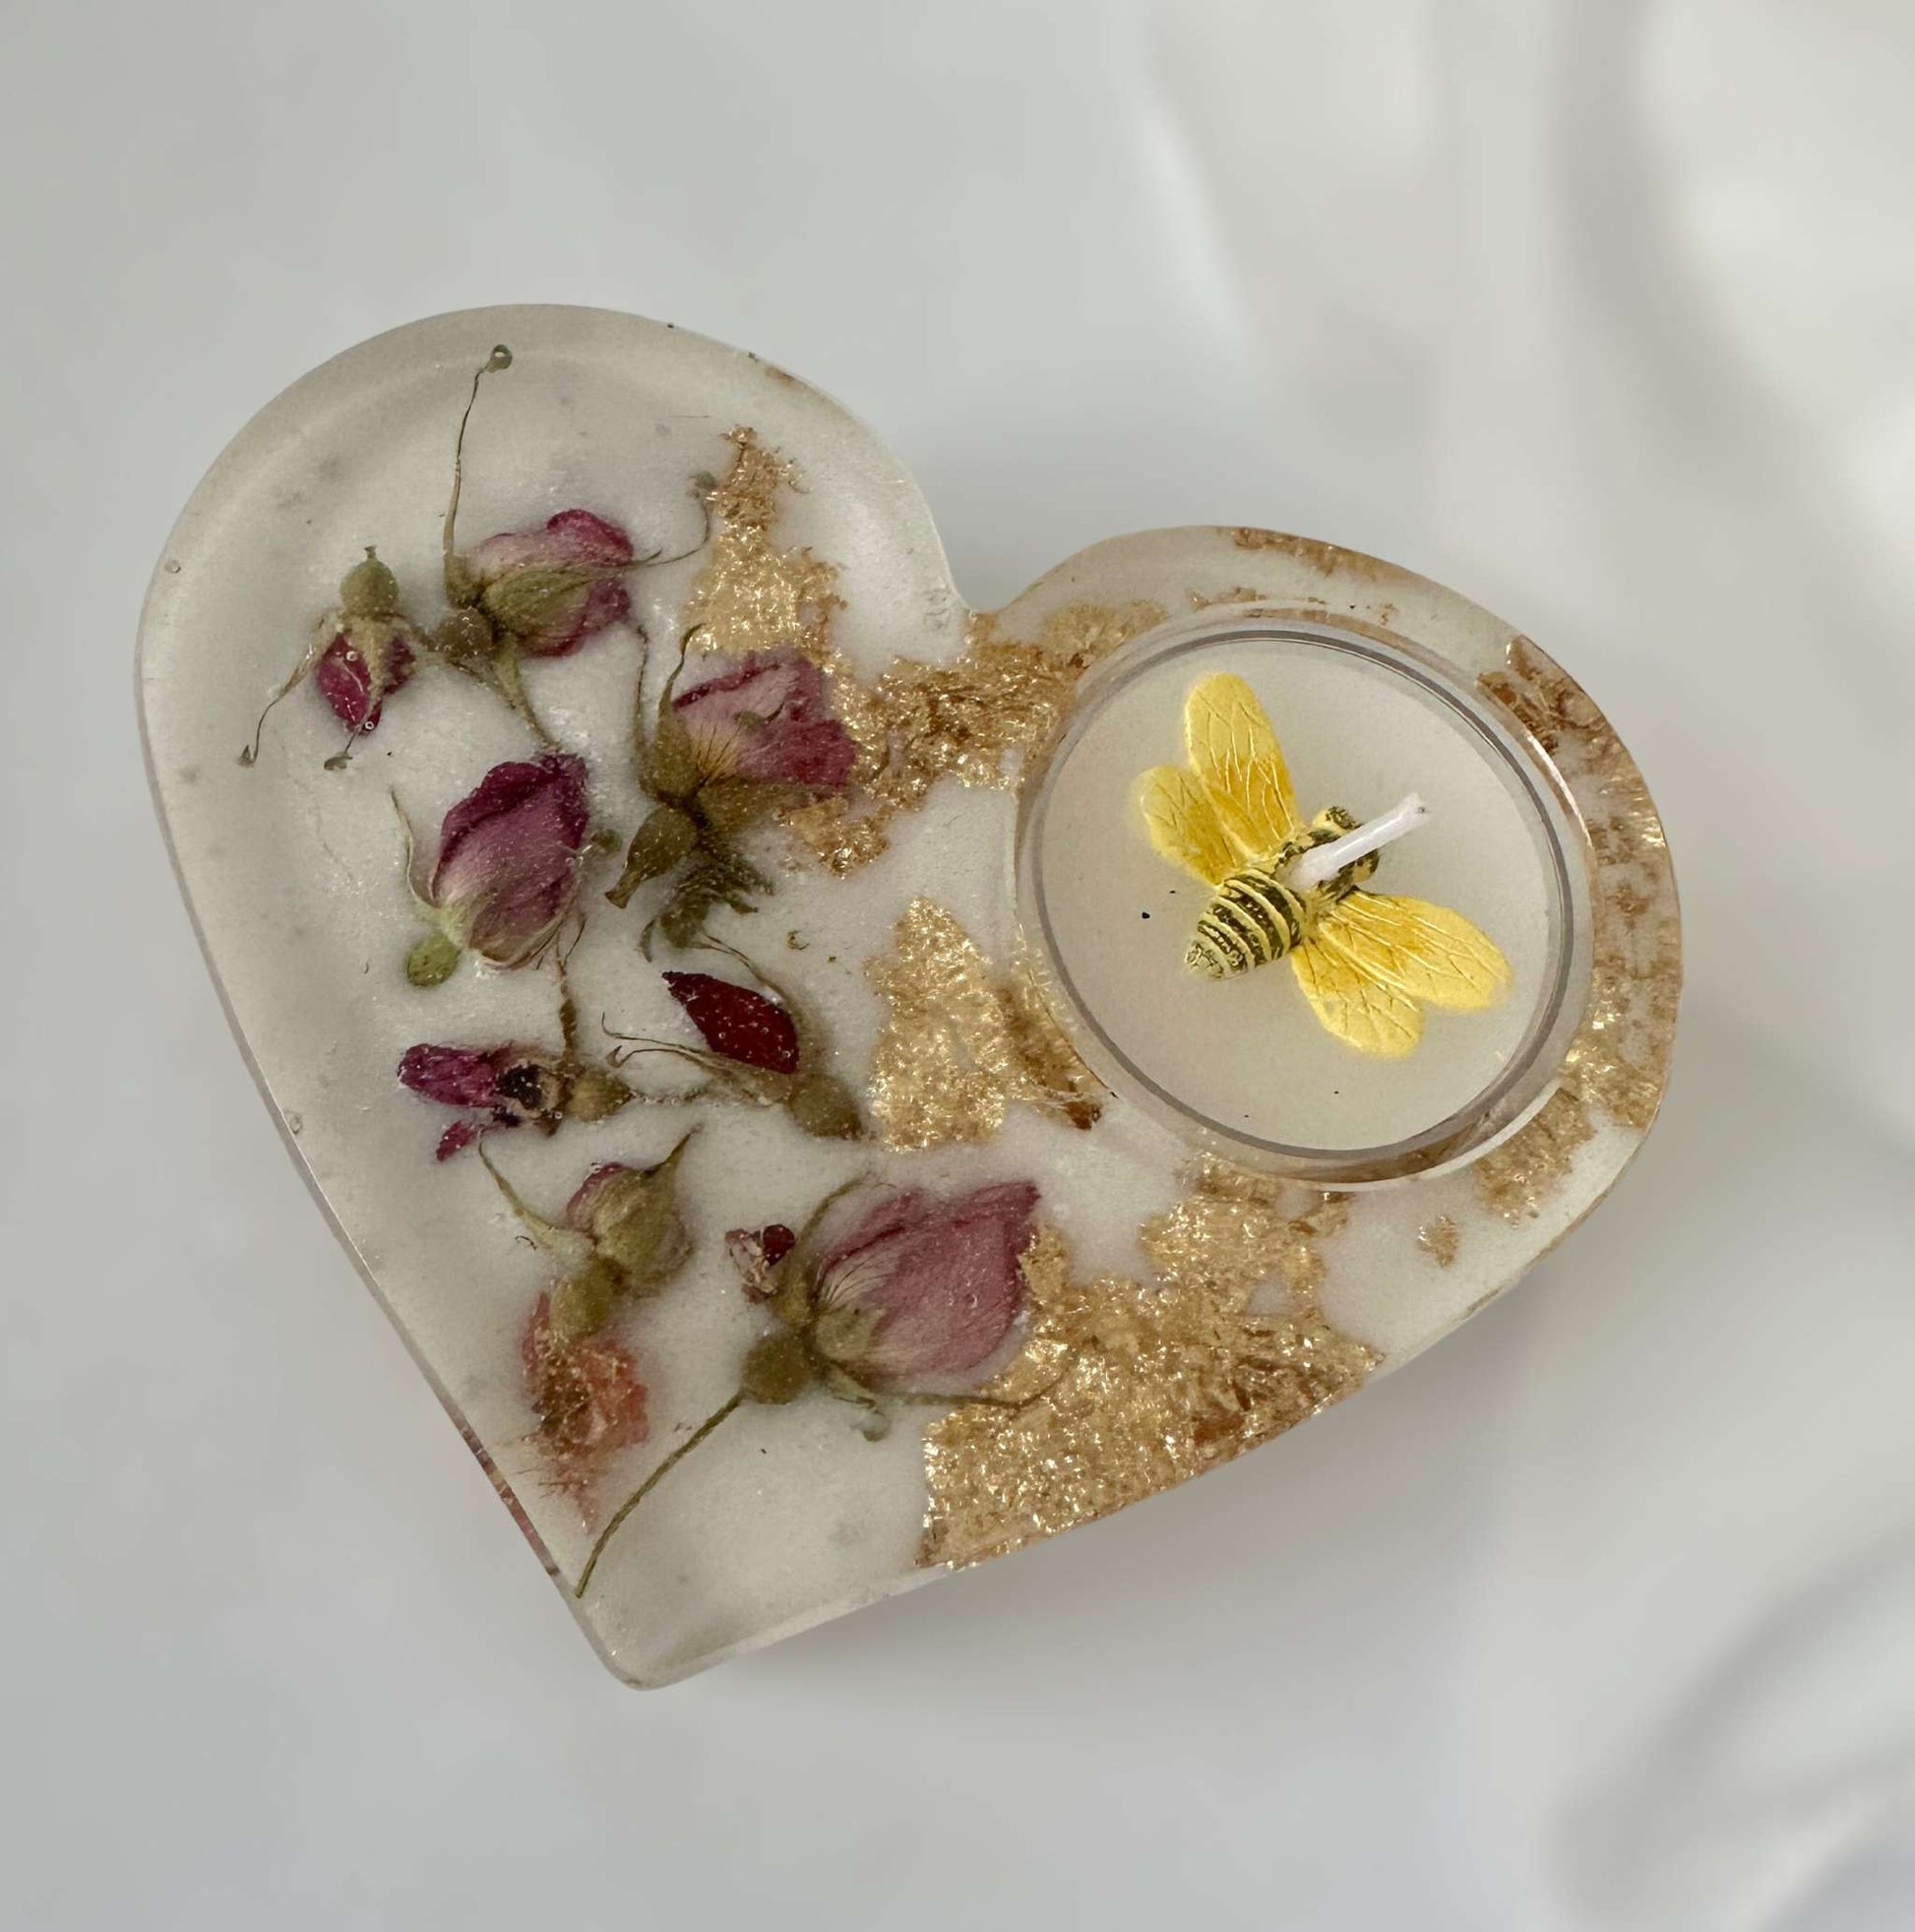 Rose Bud Tealight Candle Holder Handmade with Epoxy Resin and Flowers